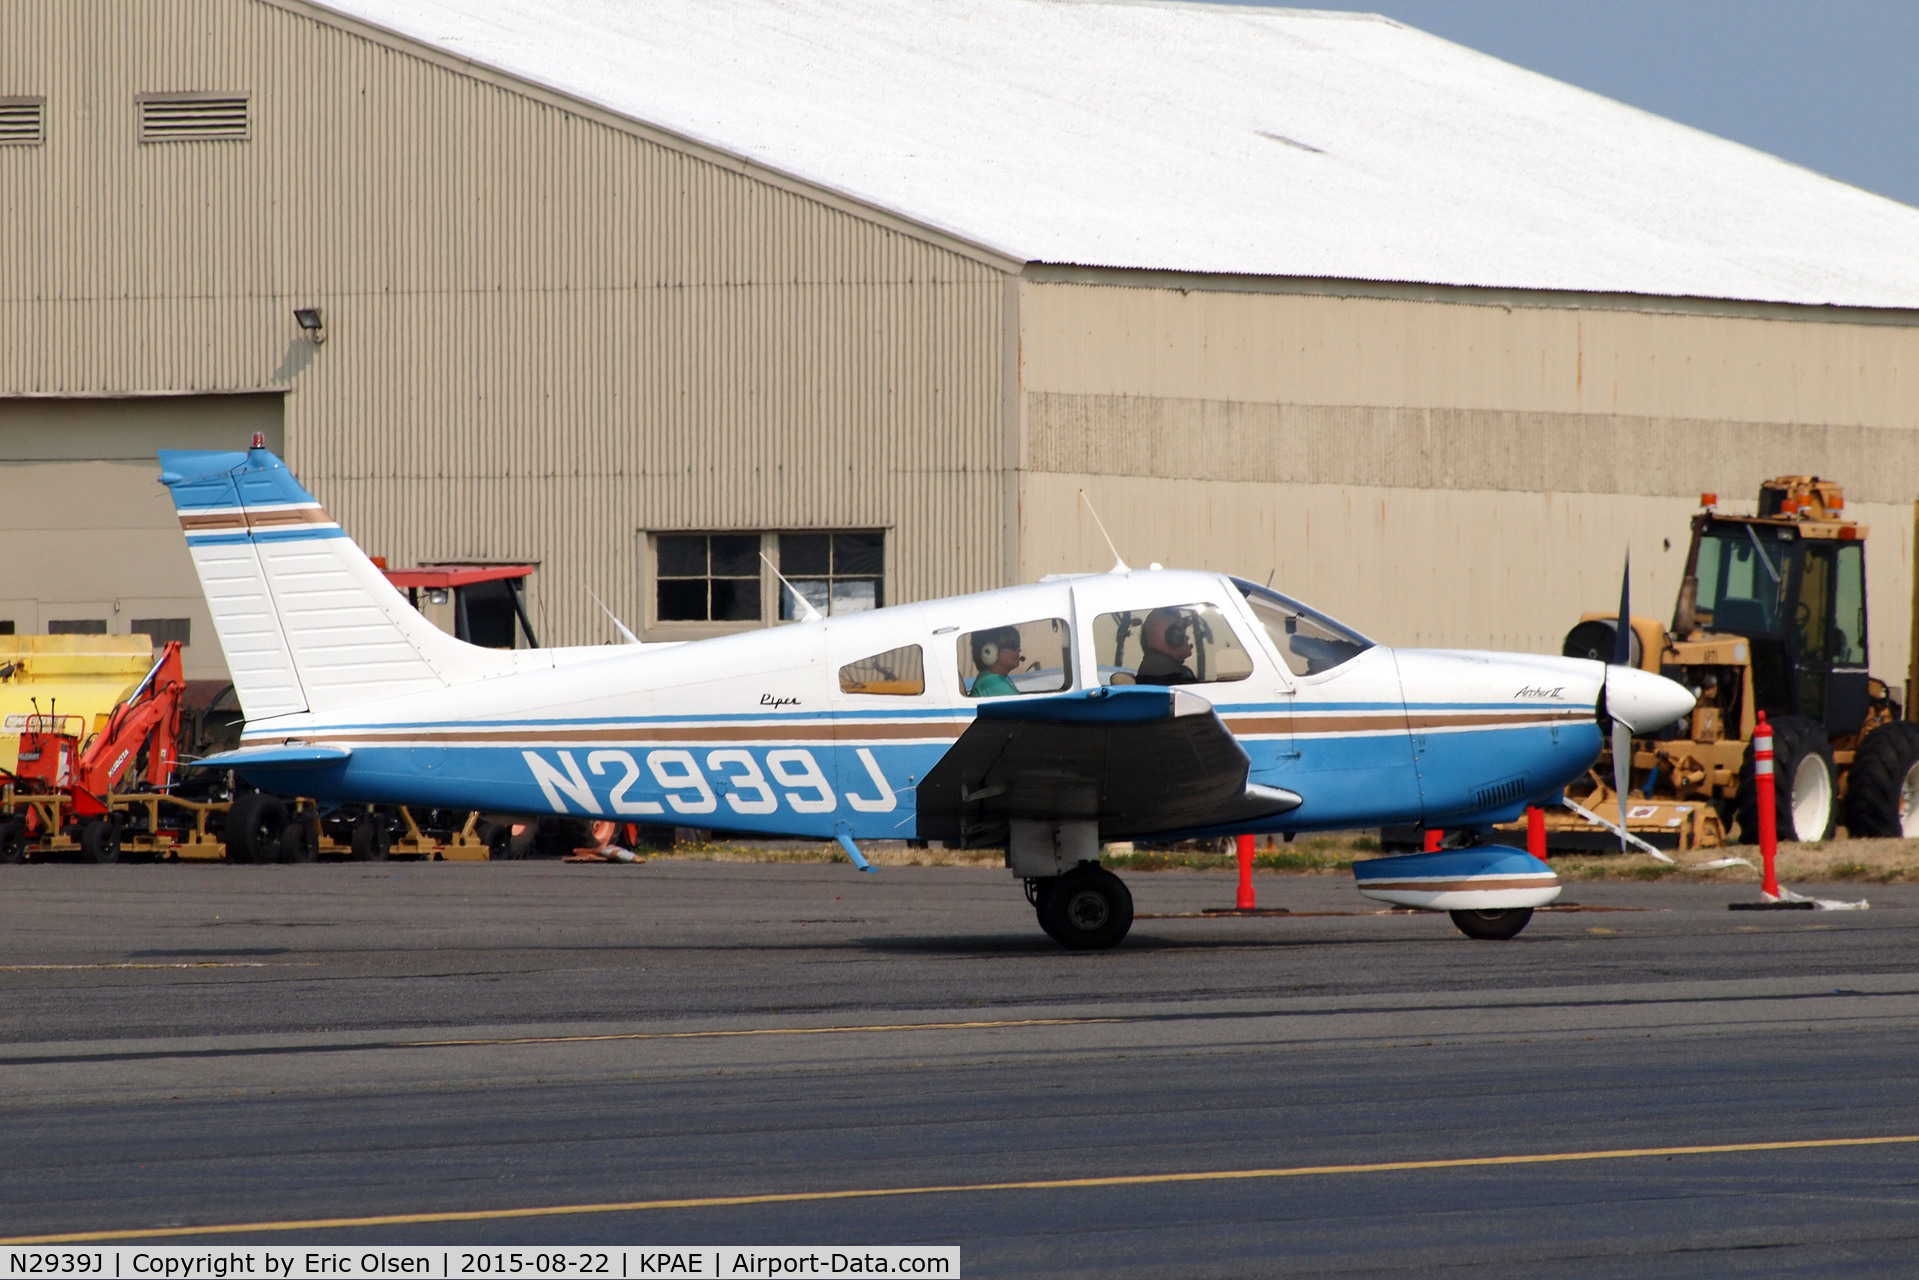 N2939J, 1979 Piper PA-28-181 C/N 28-7990576, Piper during engine warm up.